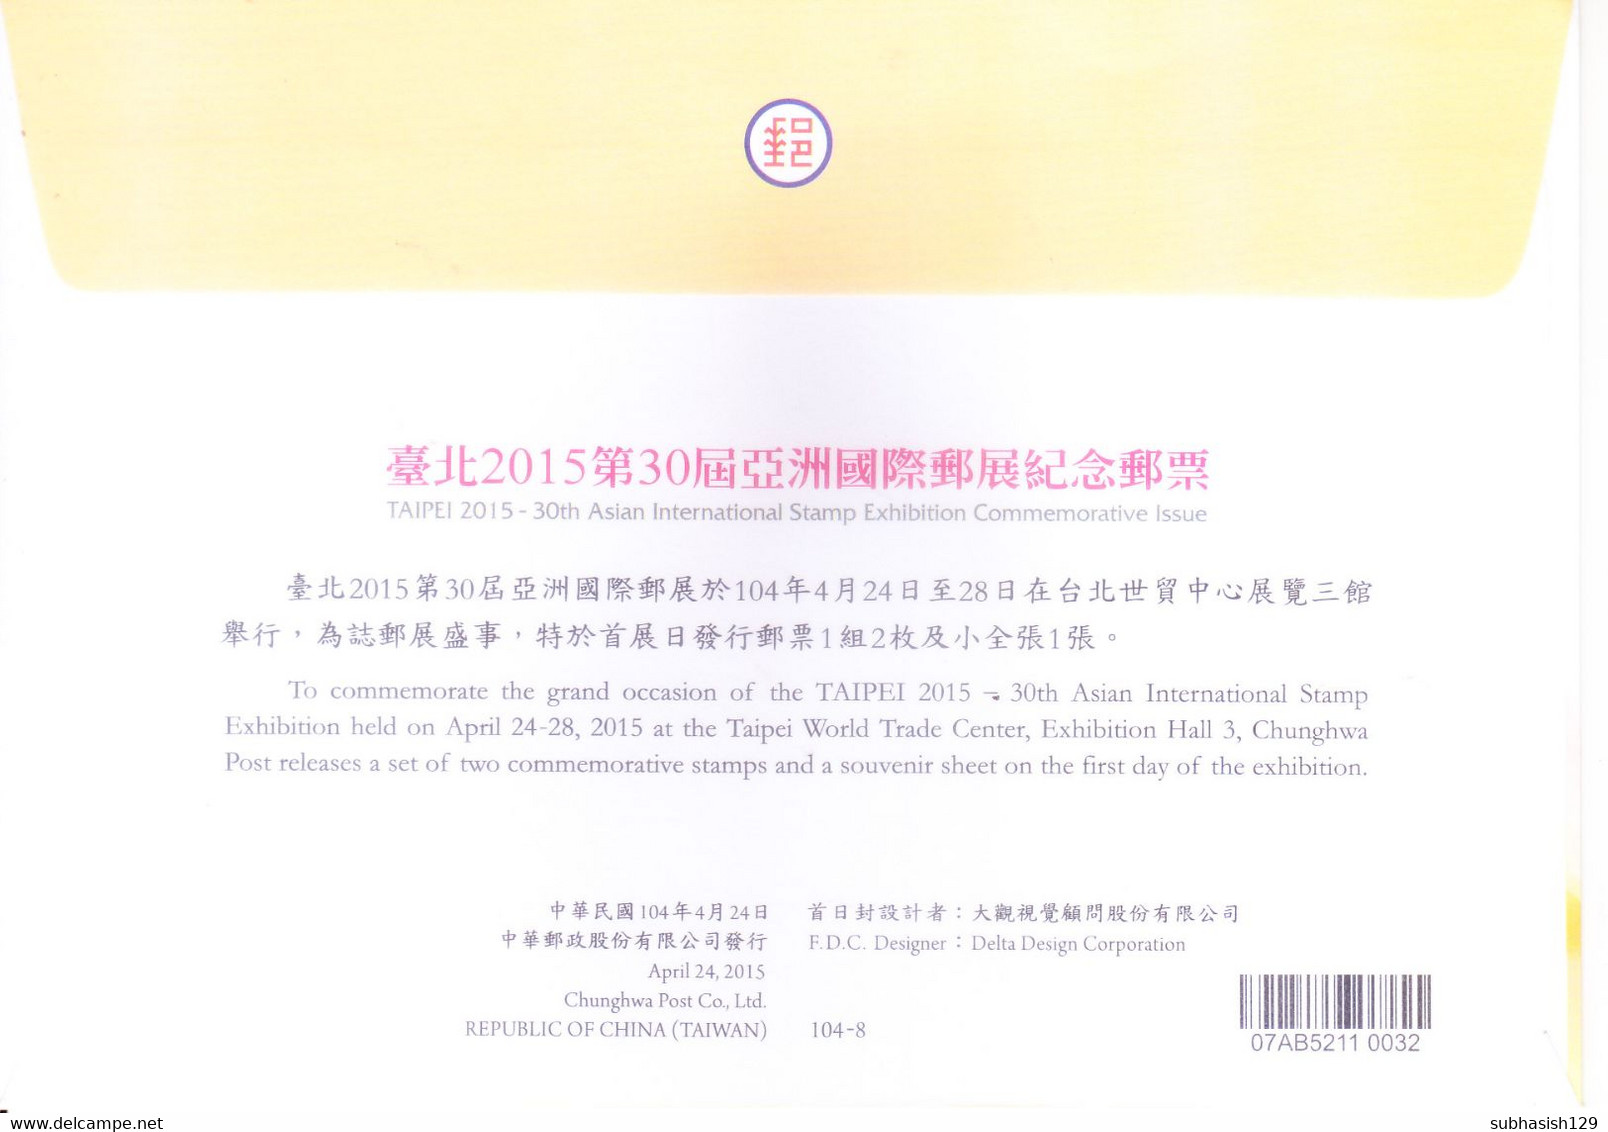 TAIWAN CHINA : FDC : 24 APRIL 2015 : TAIPEI 2015 - 30TH ASIAN INTERNATIONAL STAMP EXHIBITION - Covers & Documents